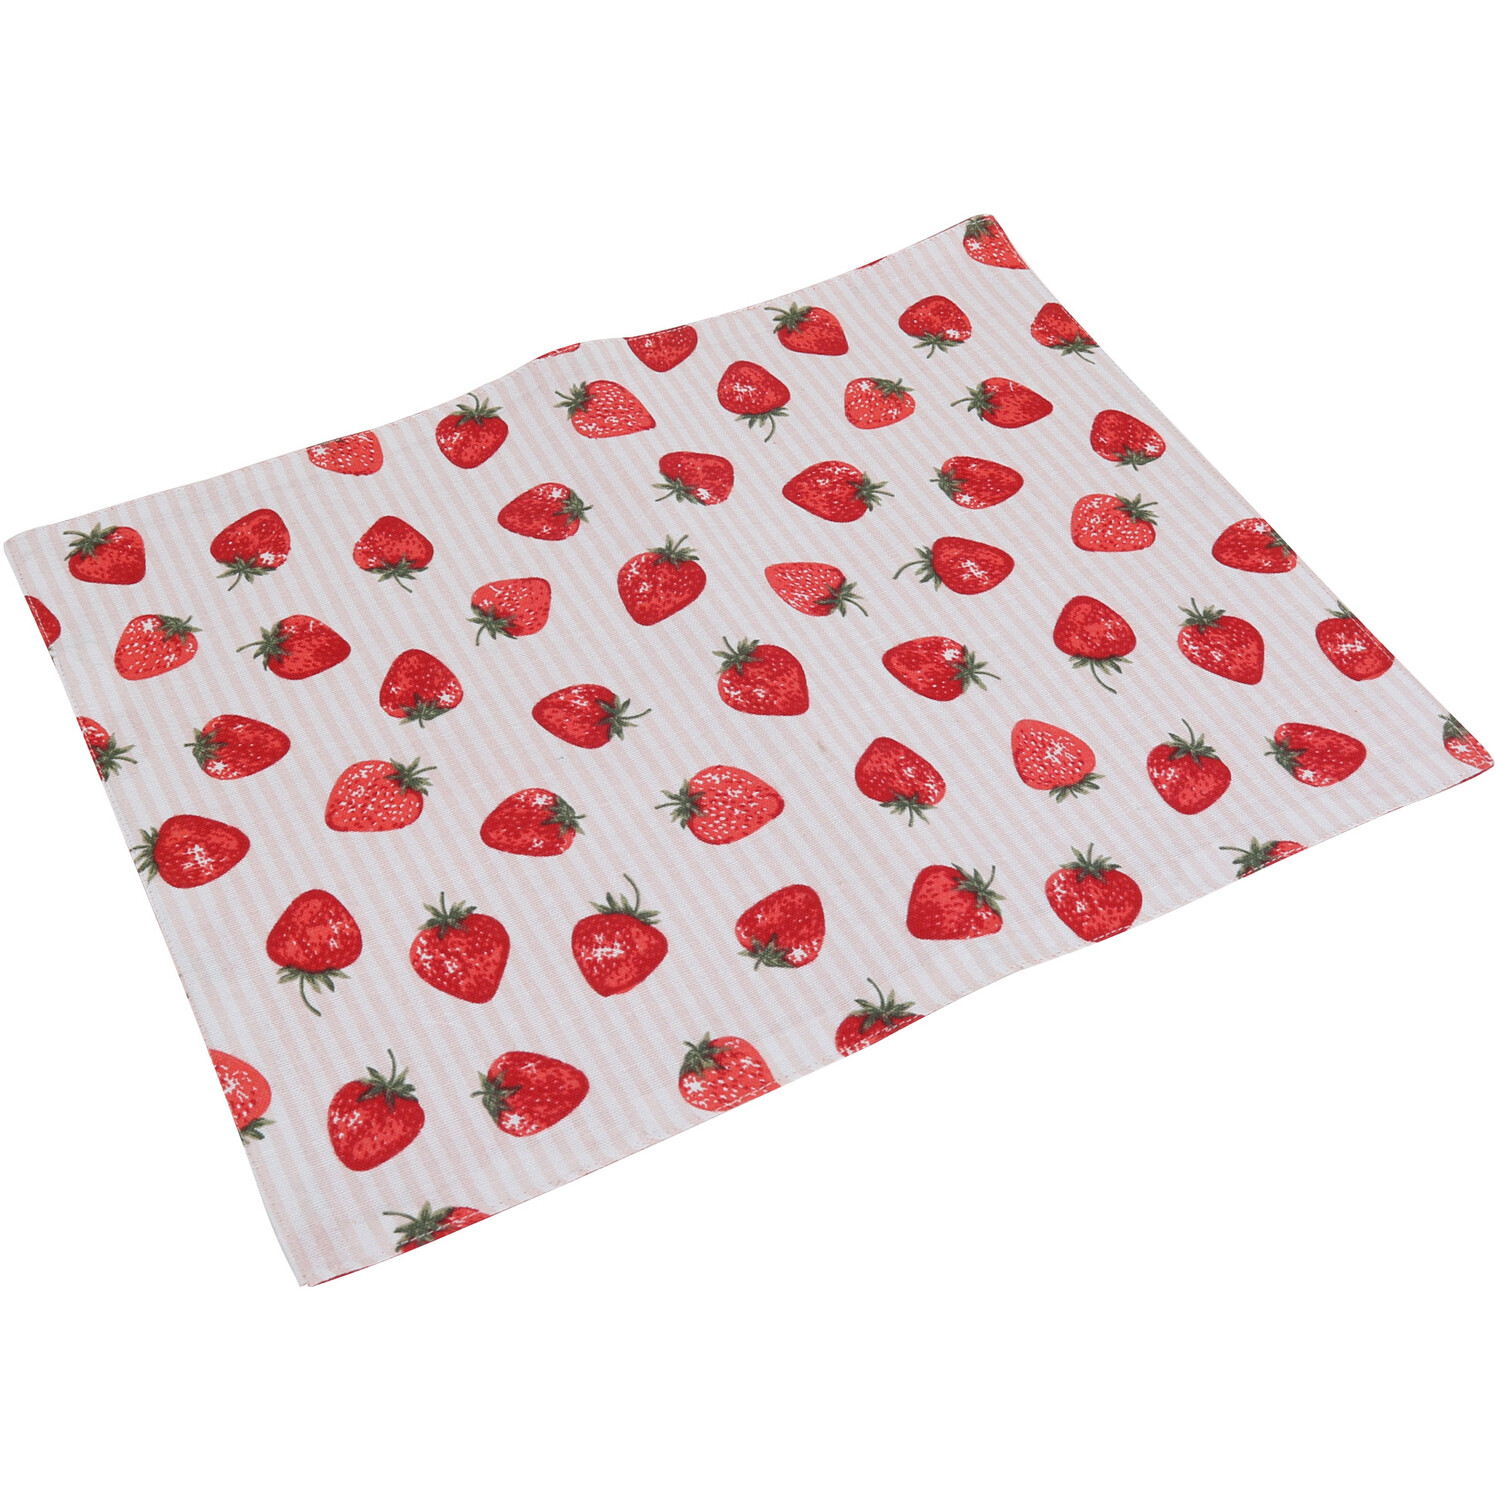 Pack of 2 Strawberry Placemats - Red Image 4